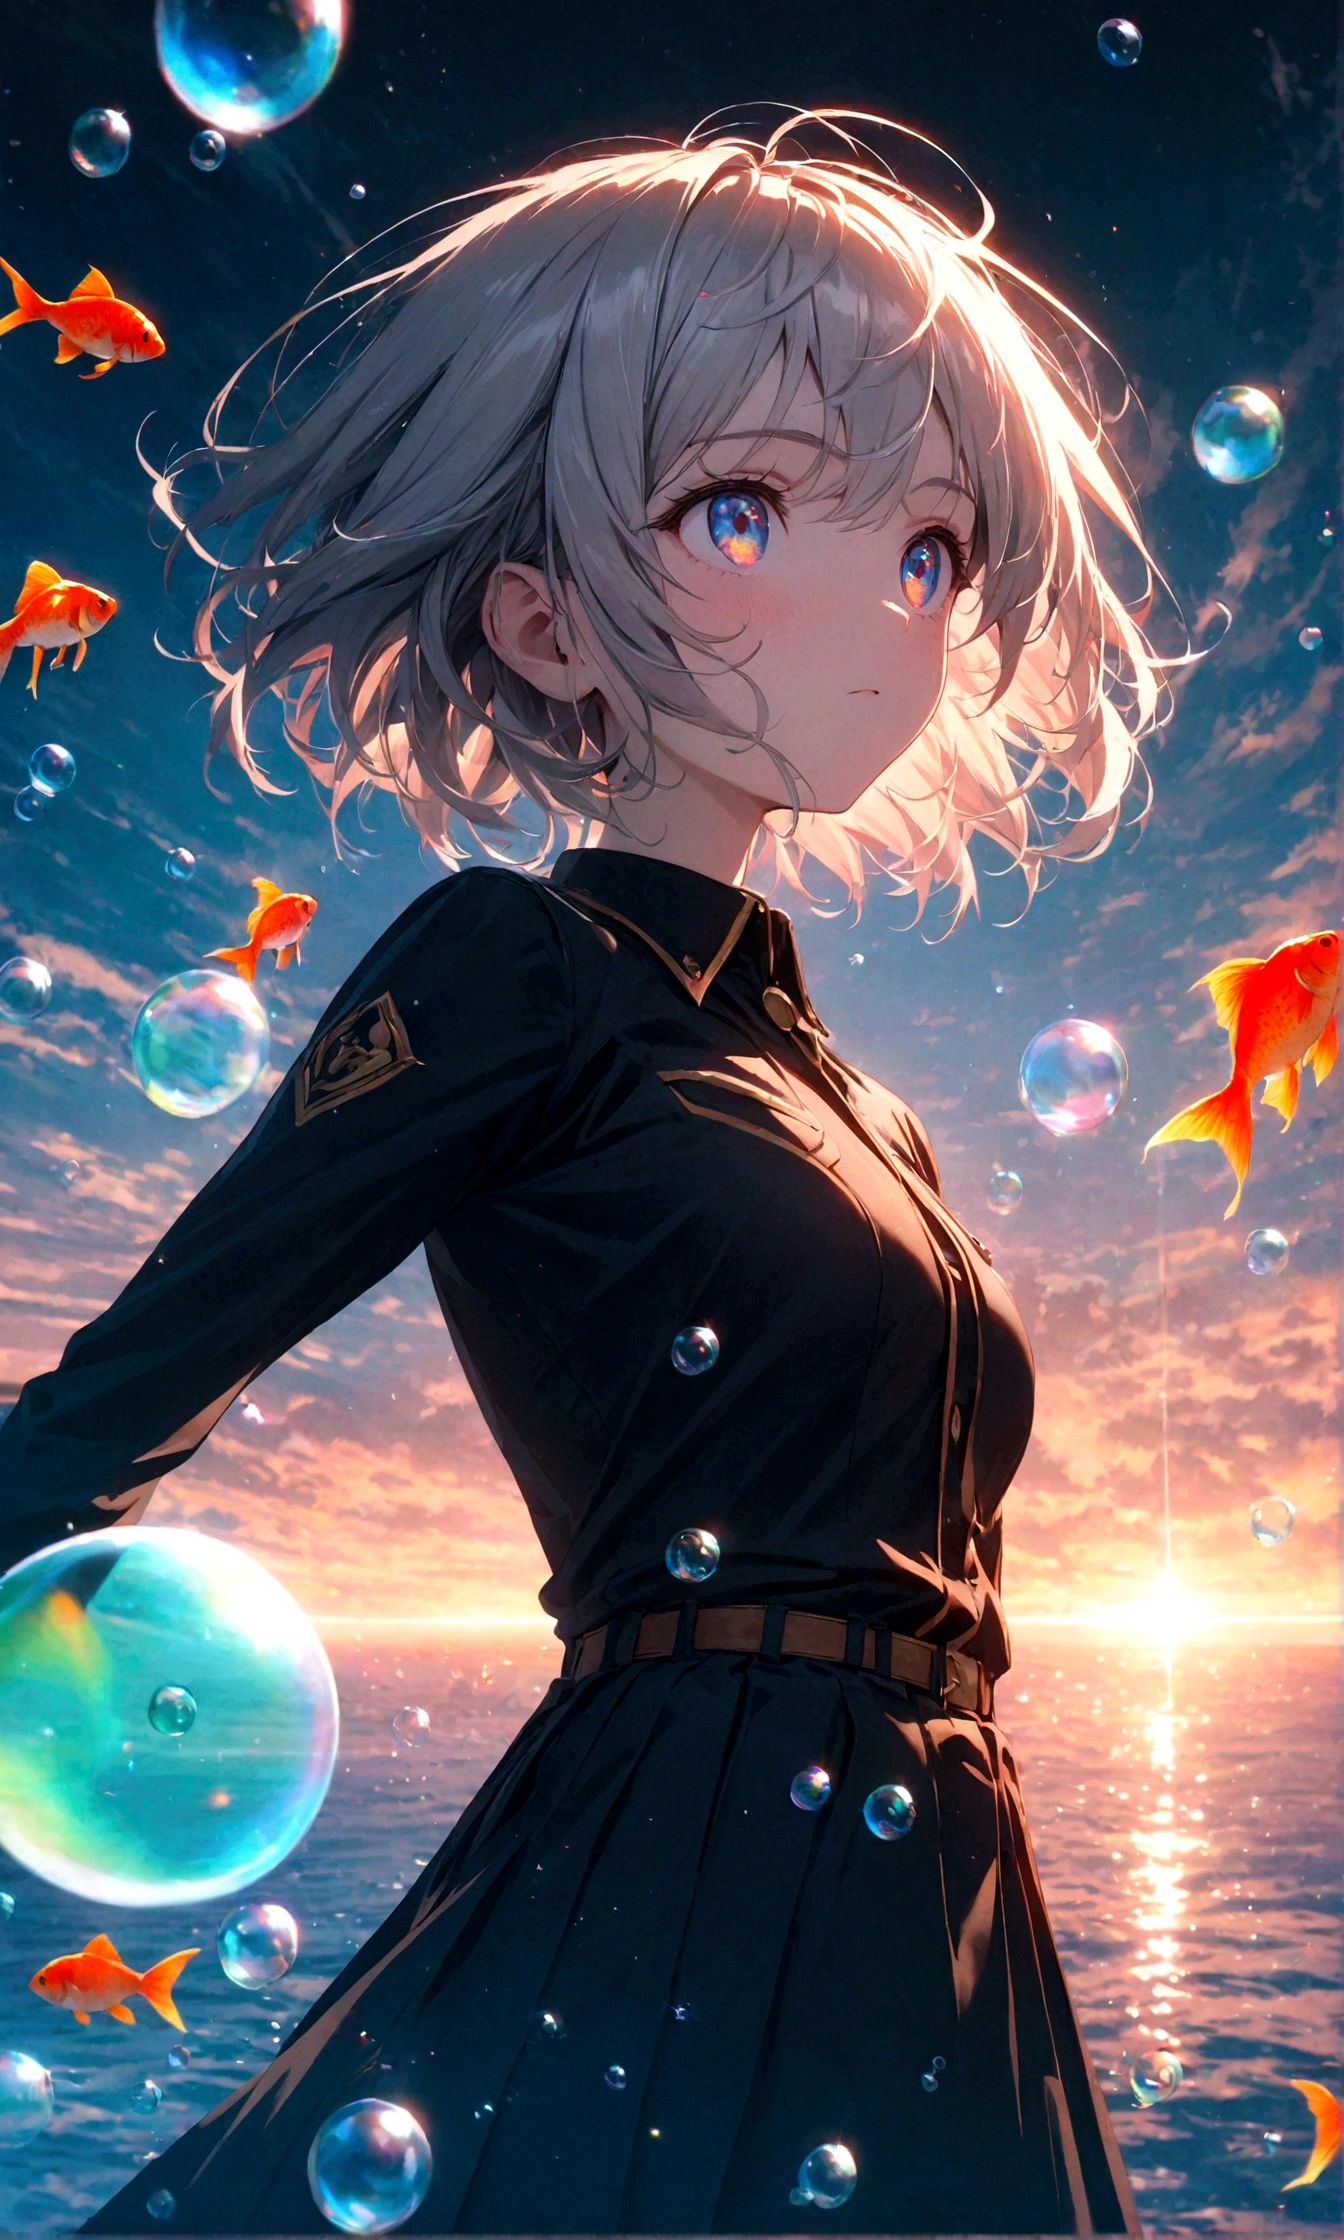 (female\(student, age of 15, JK, short hair, silver hair, floating hair, cosmic colored eyes, black color uniform of school, pale skin, tired face with no shine in the eyes\) is looking up at the sky), (so many goldfish are swimming in the air), beautiful sky, beautiful clouds, summery colorful flowers are blooming here and there, (crystal clear bubbles are shining prism here and there in the sky), there is the noonday moon and noonday stars in the sky, at downtown, BREAK ,quality\(8k,wallpaper of extremely detailed CG unit, ​masterpiece,hight resolution,top-quality,top-quality real texture skin,hyper realisitic,increase the resolution,RAW photos,best qualtiy,highly detailed,the wallpaper,cinematic lighting,ray trace,golden ratio\),(long shot),wide shot,